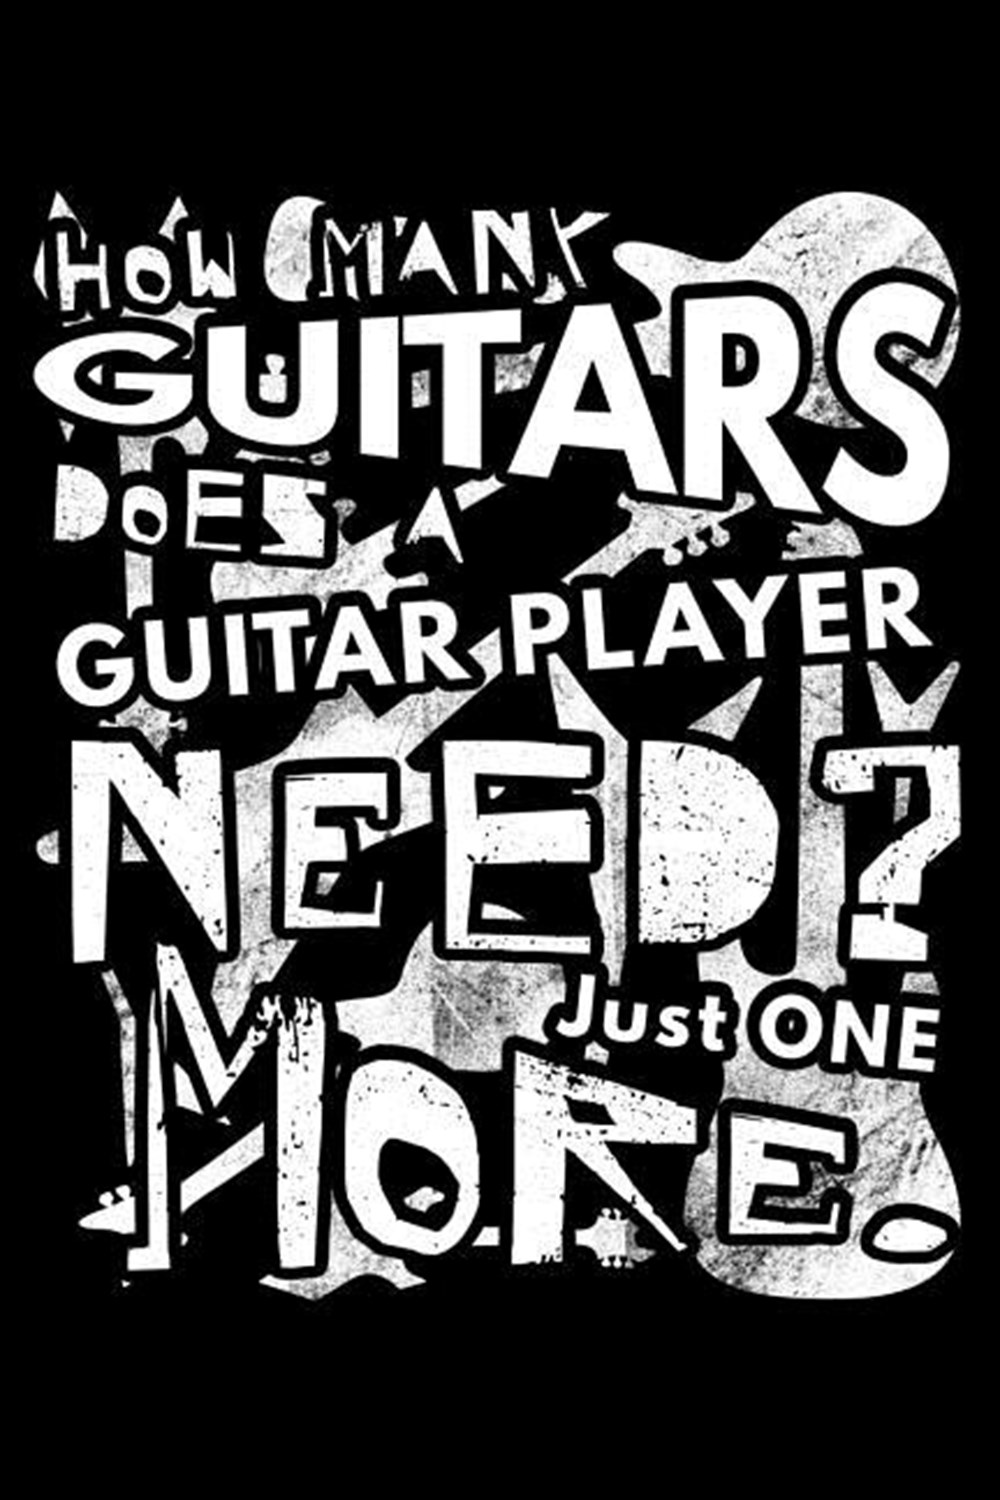 How Many Guitars Does A Guitar Player Need? Just One More. Blank Paper Sketch Book - Artist Sketch P